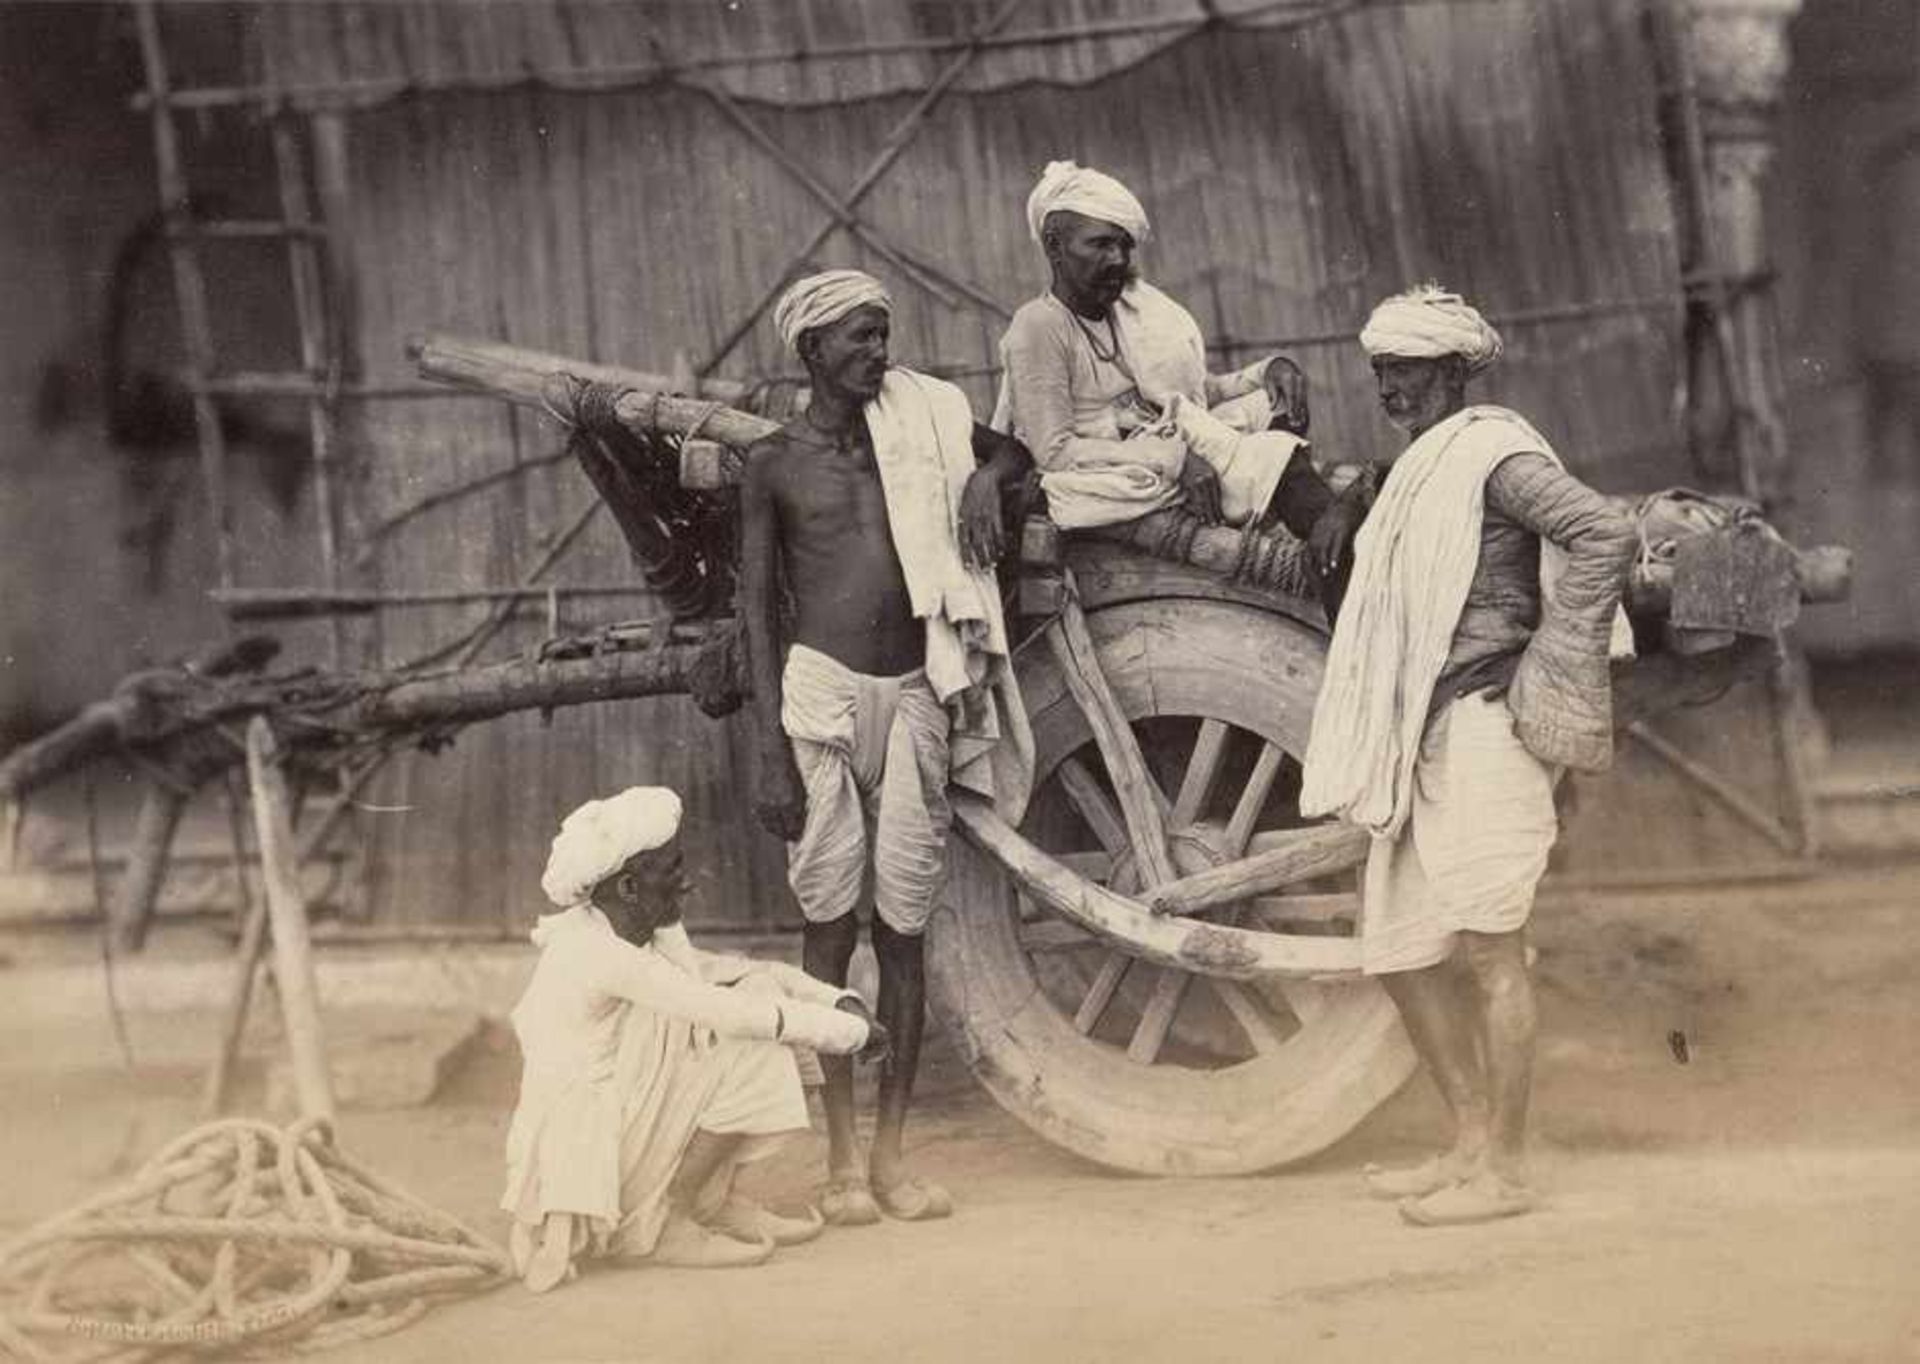 British India: Snake charmersPhotographer: Taurines, Shepherd & Robertson and unknown. Snake